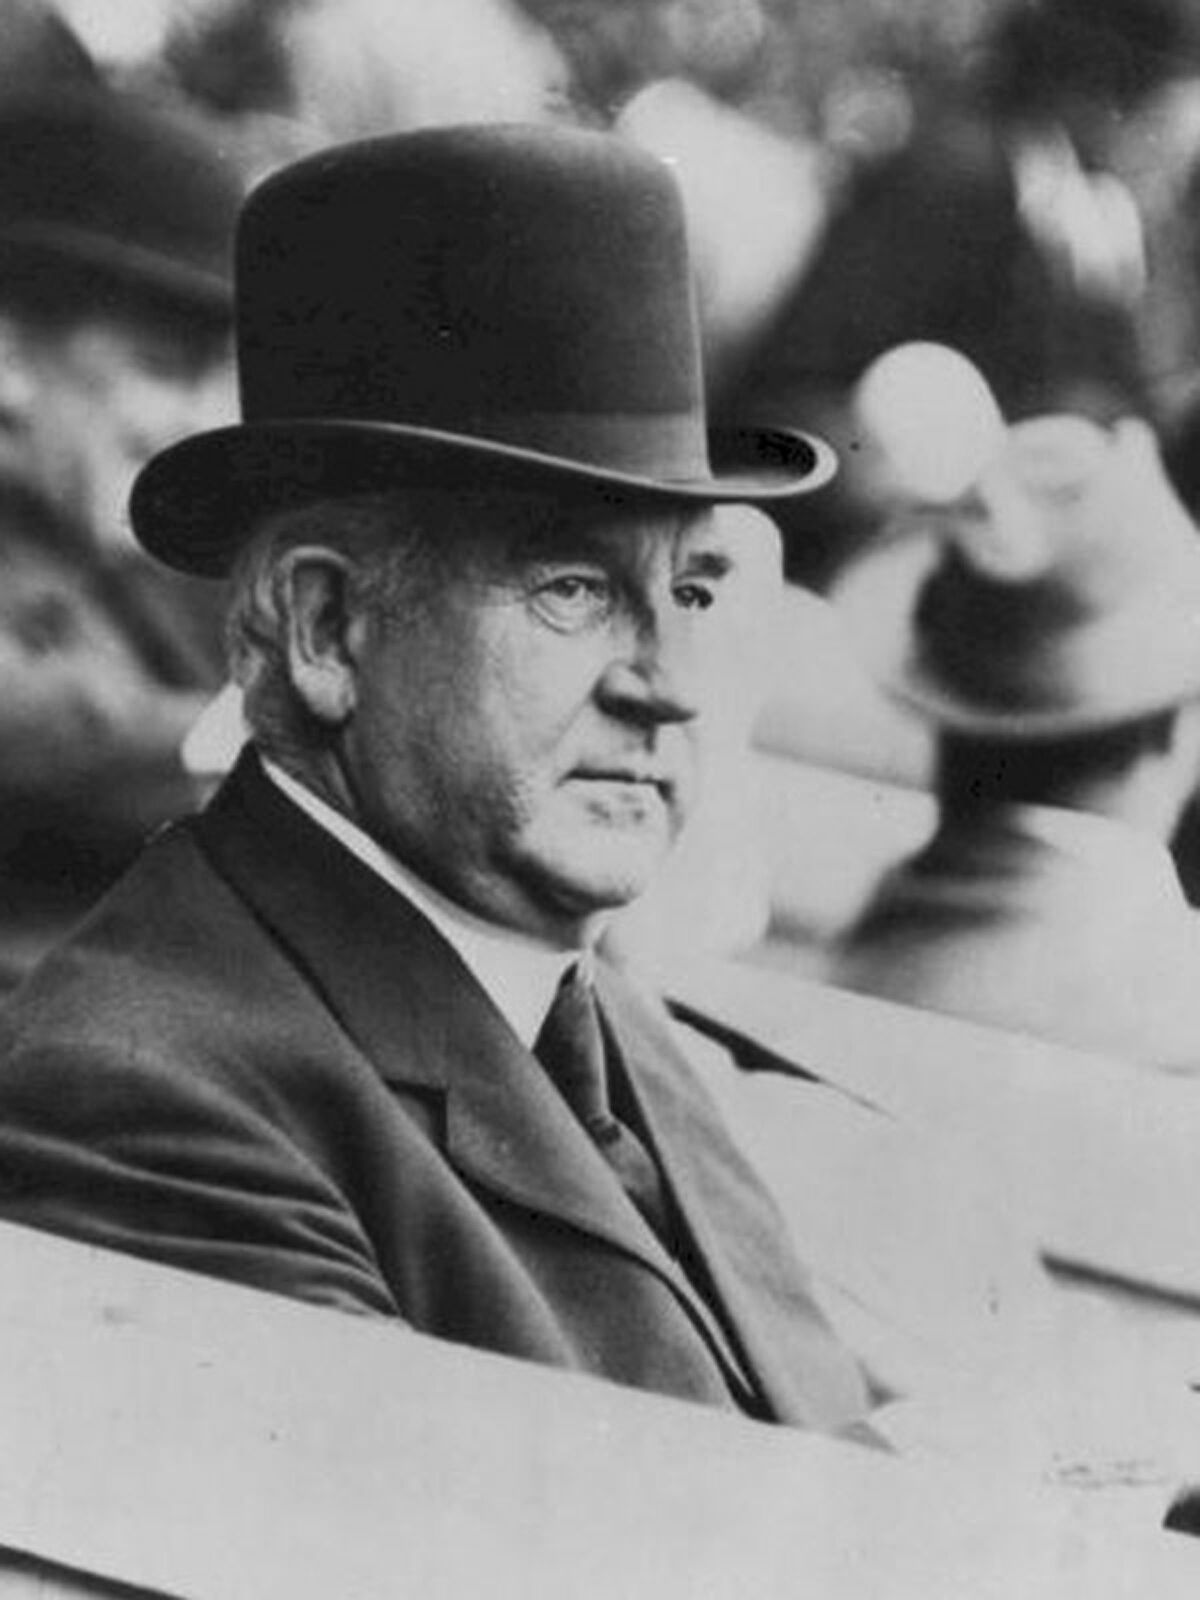 Albert G. Spalding, ex-baseball player and co-founder of the Spalding sporting goods company, established Sunset Cliffs Park.